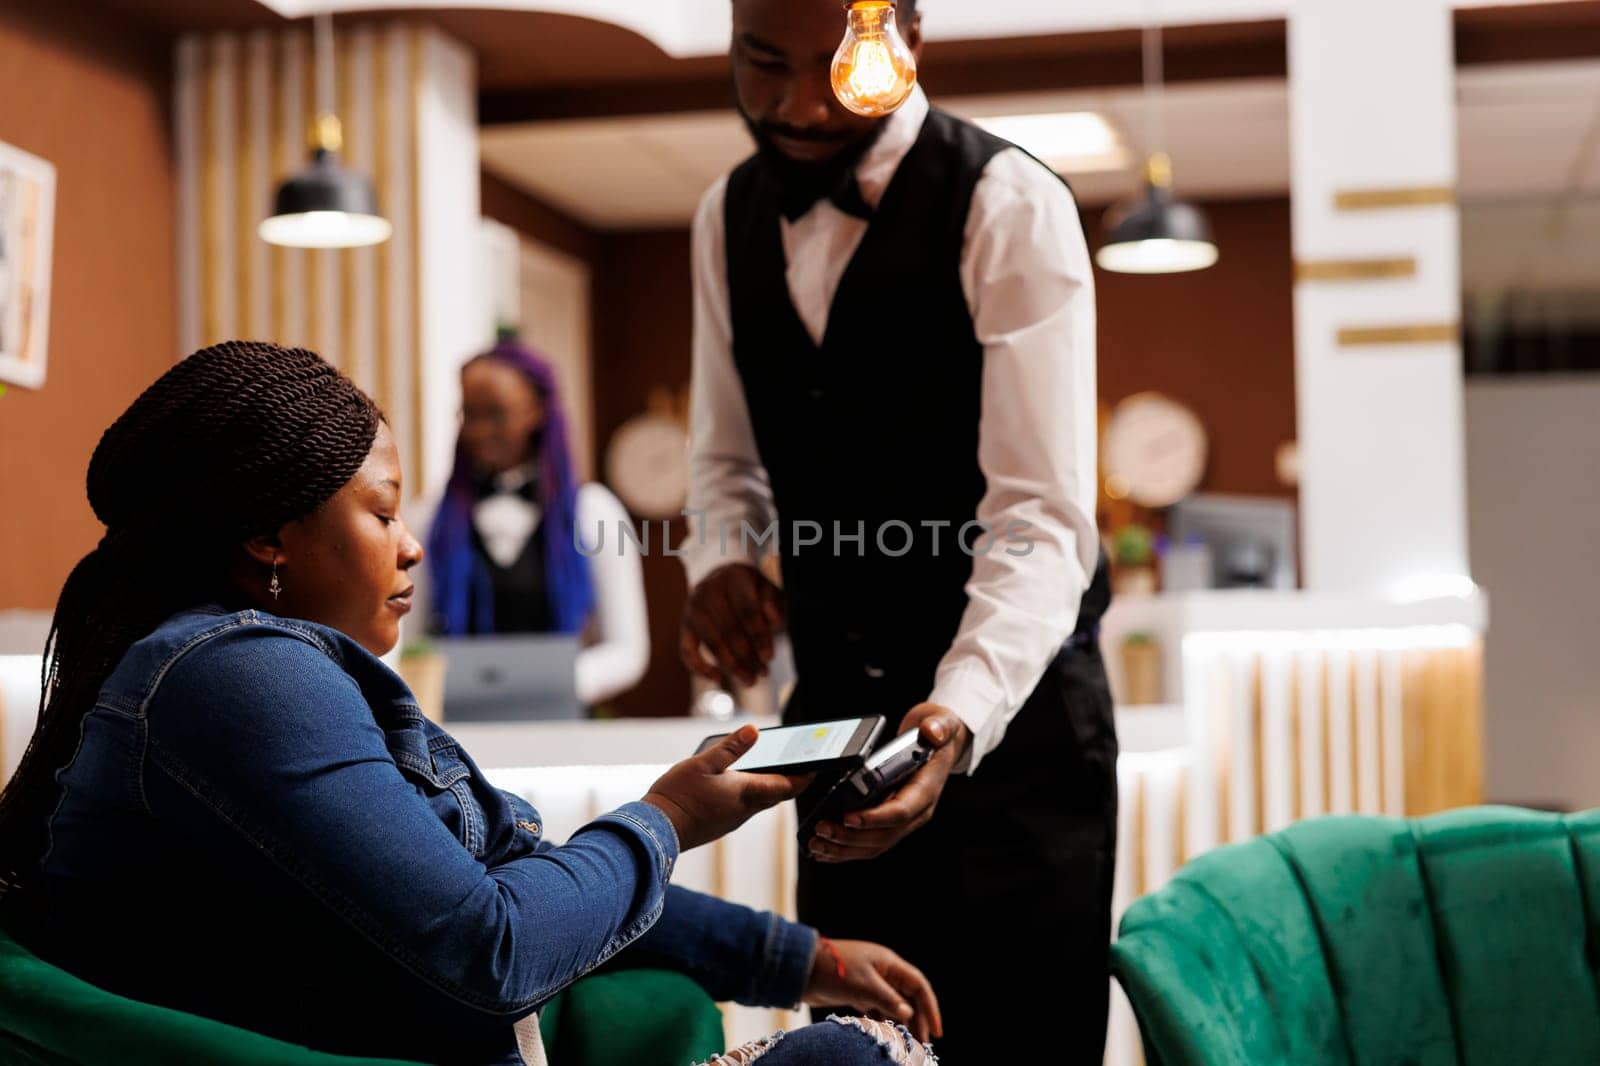 African American woman hotel guest sitting in lobby holding smartphone paying for order using nfc technology. Waiter holding POS terminal for contactless payment serving female traveler